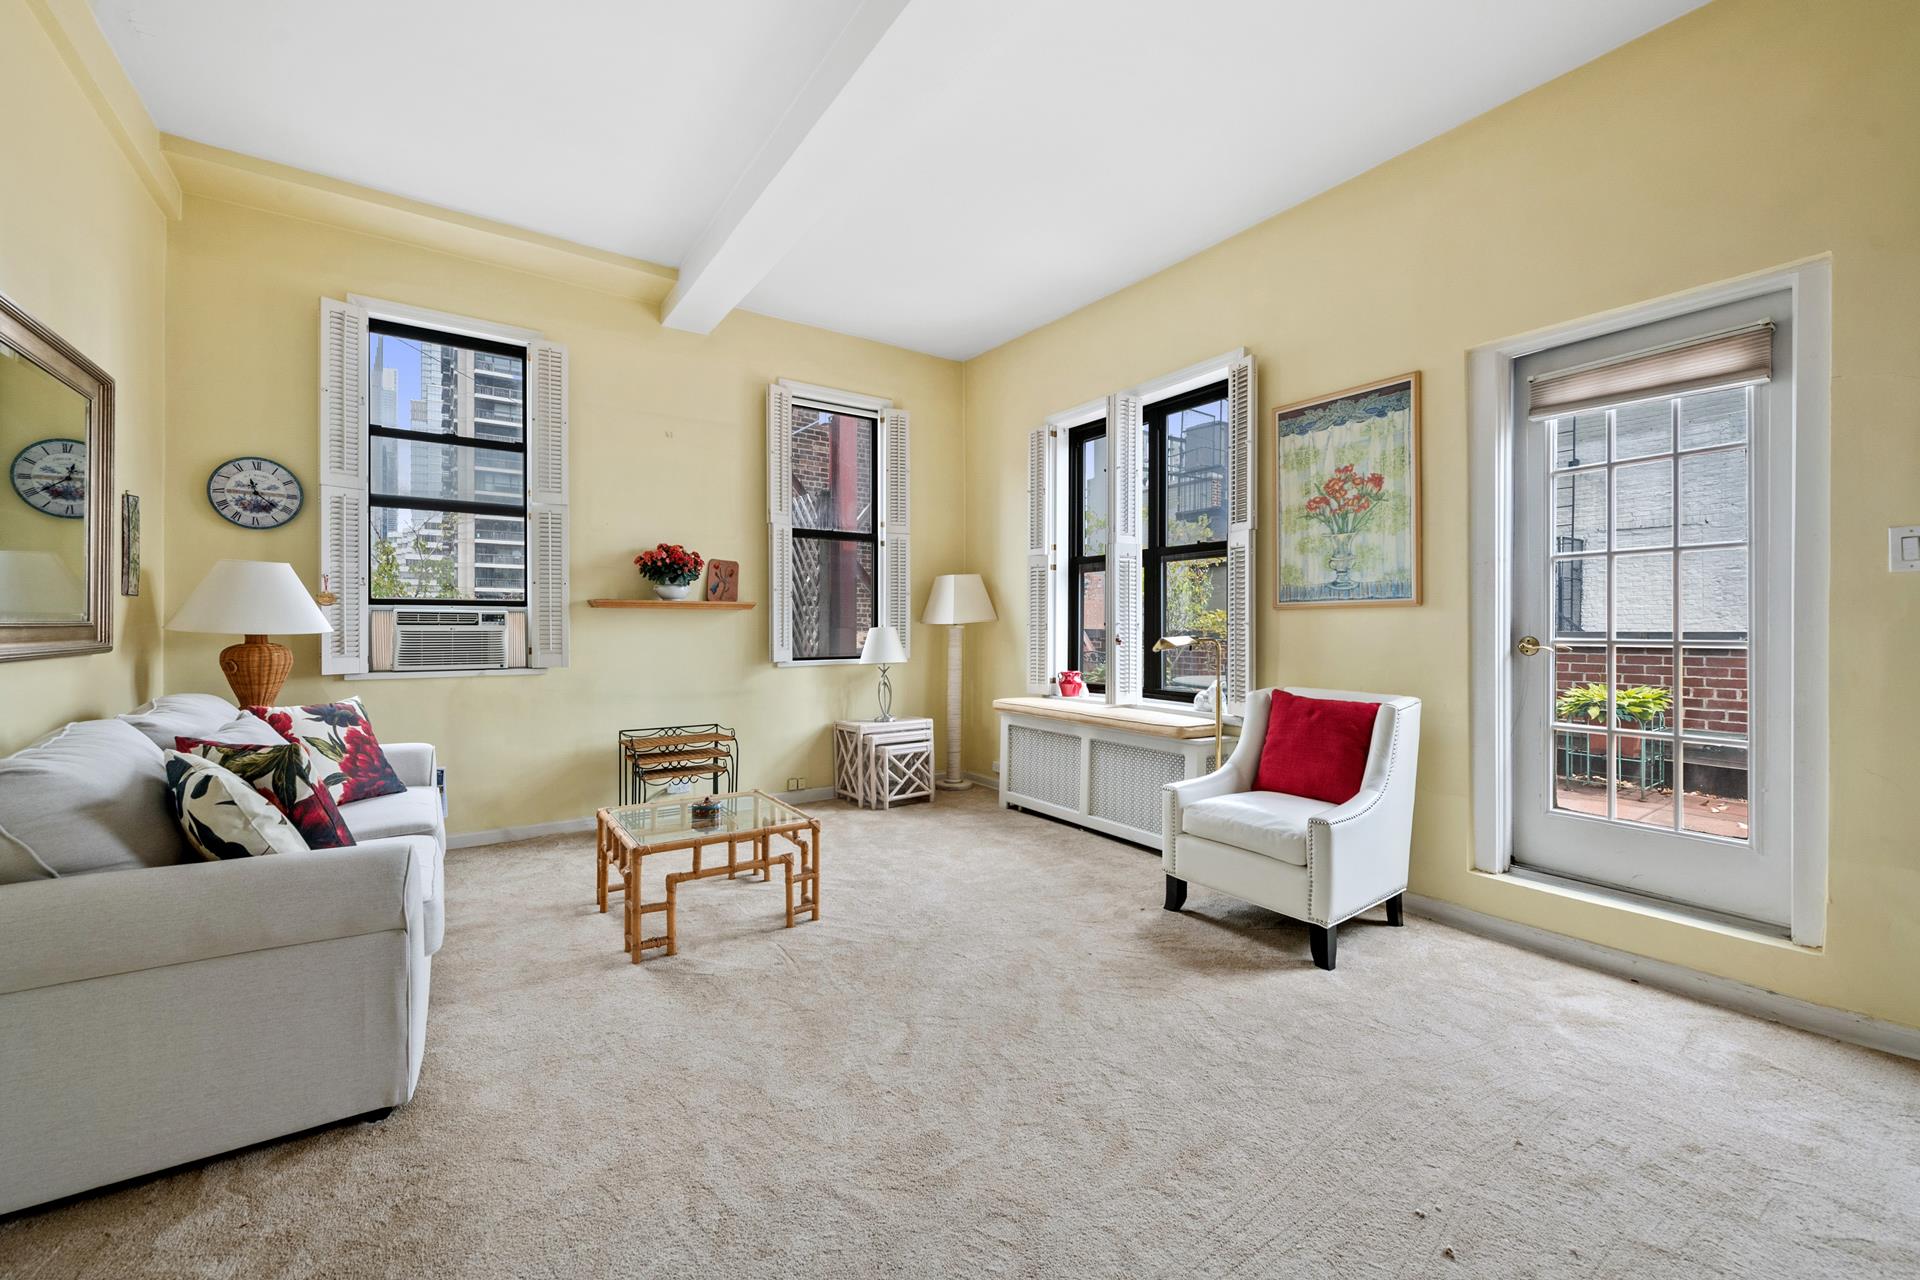 339 East 58th Street Phc, Sutton, Midtown East, NYC - 1 Bathrooms  
2 Rooms - 